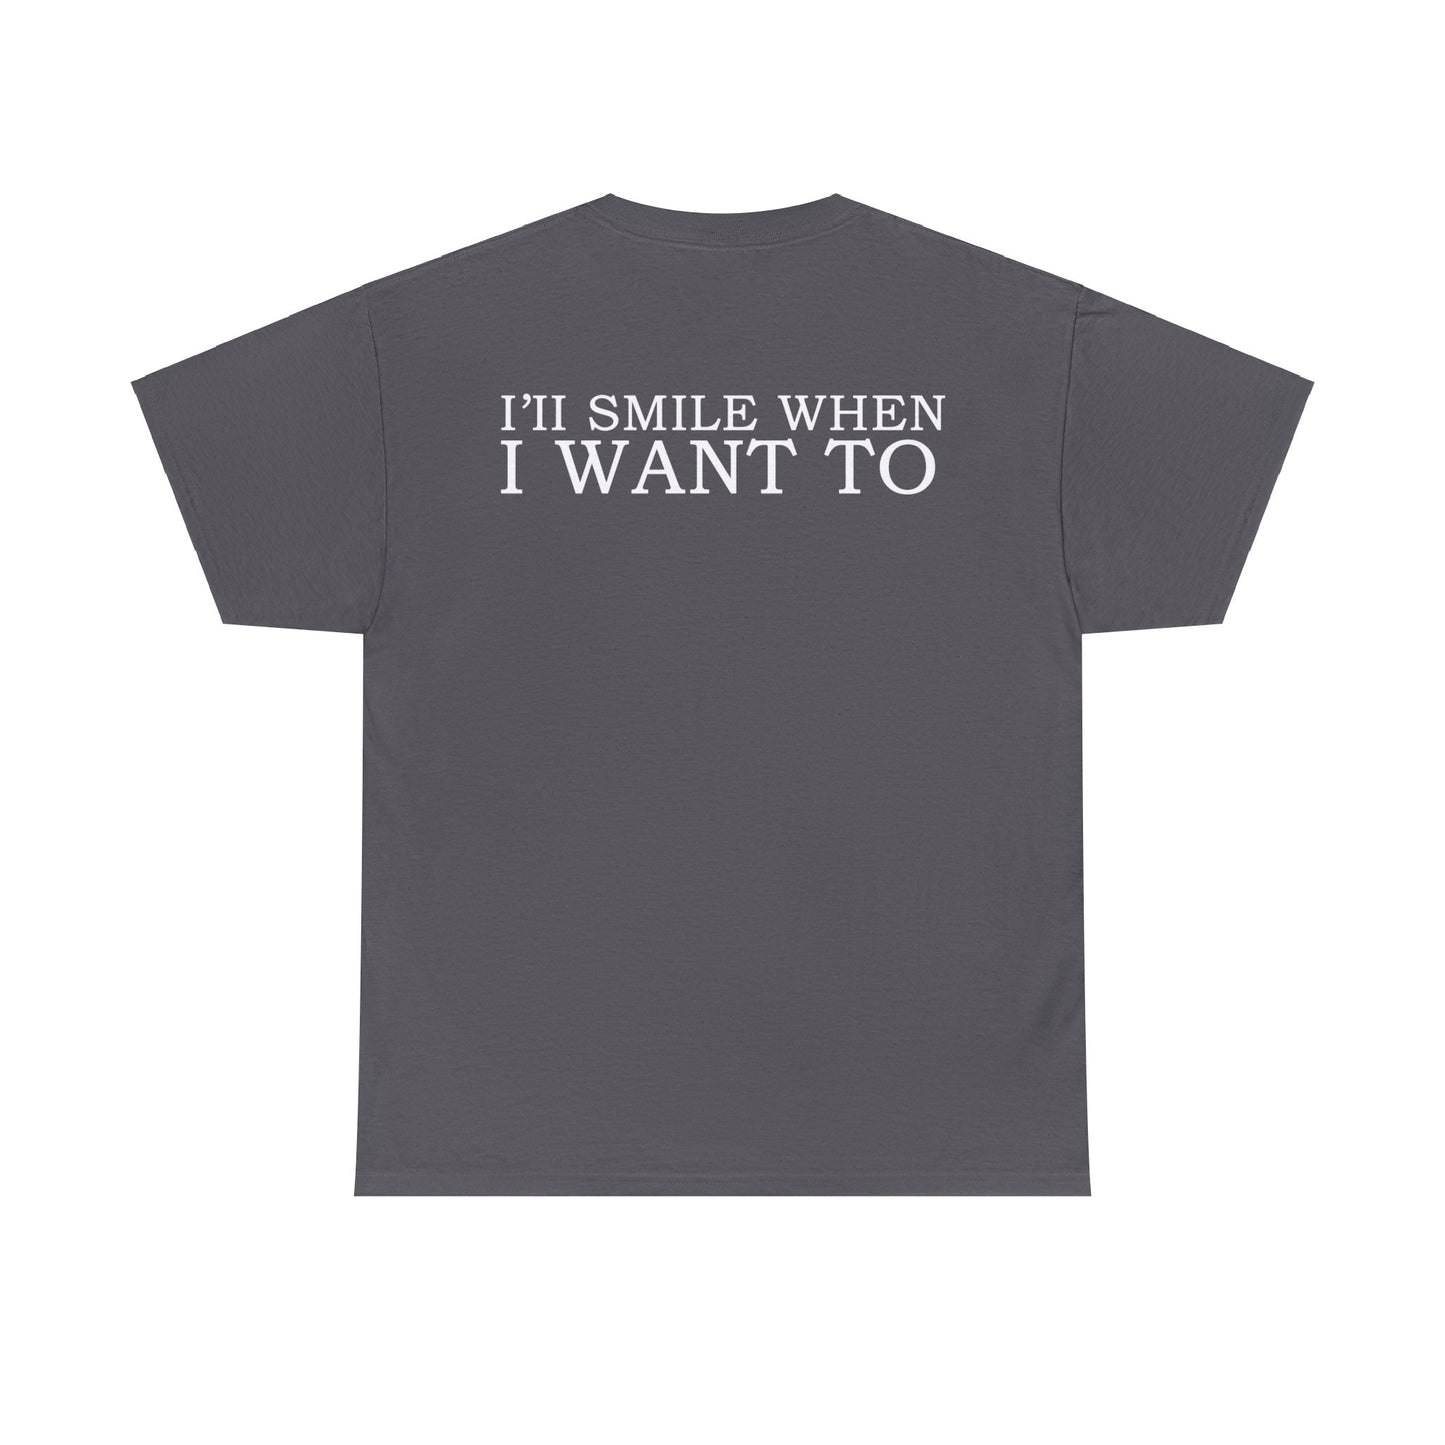 When I Want To - Tee